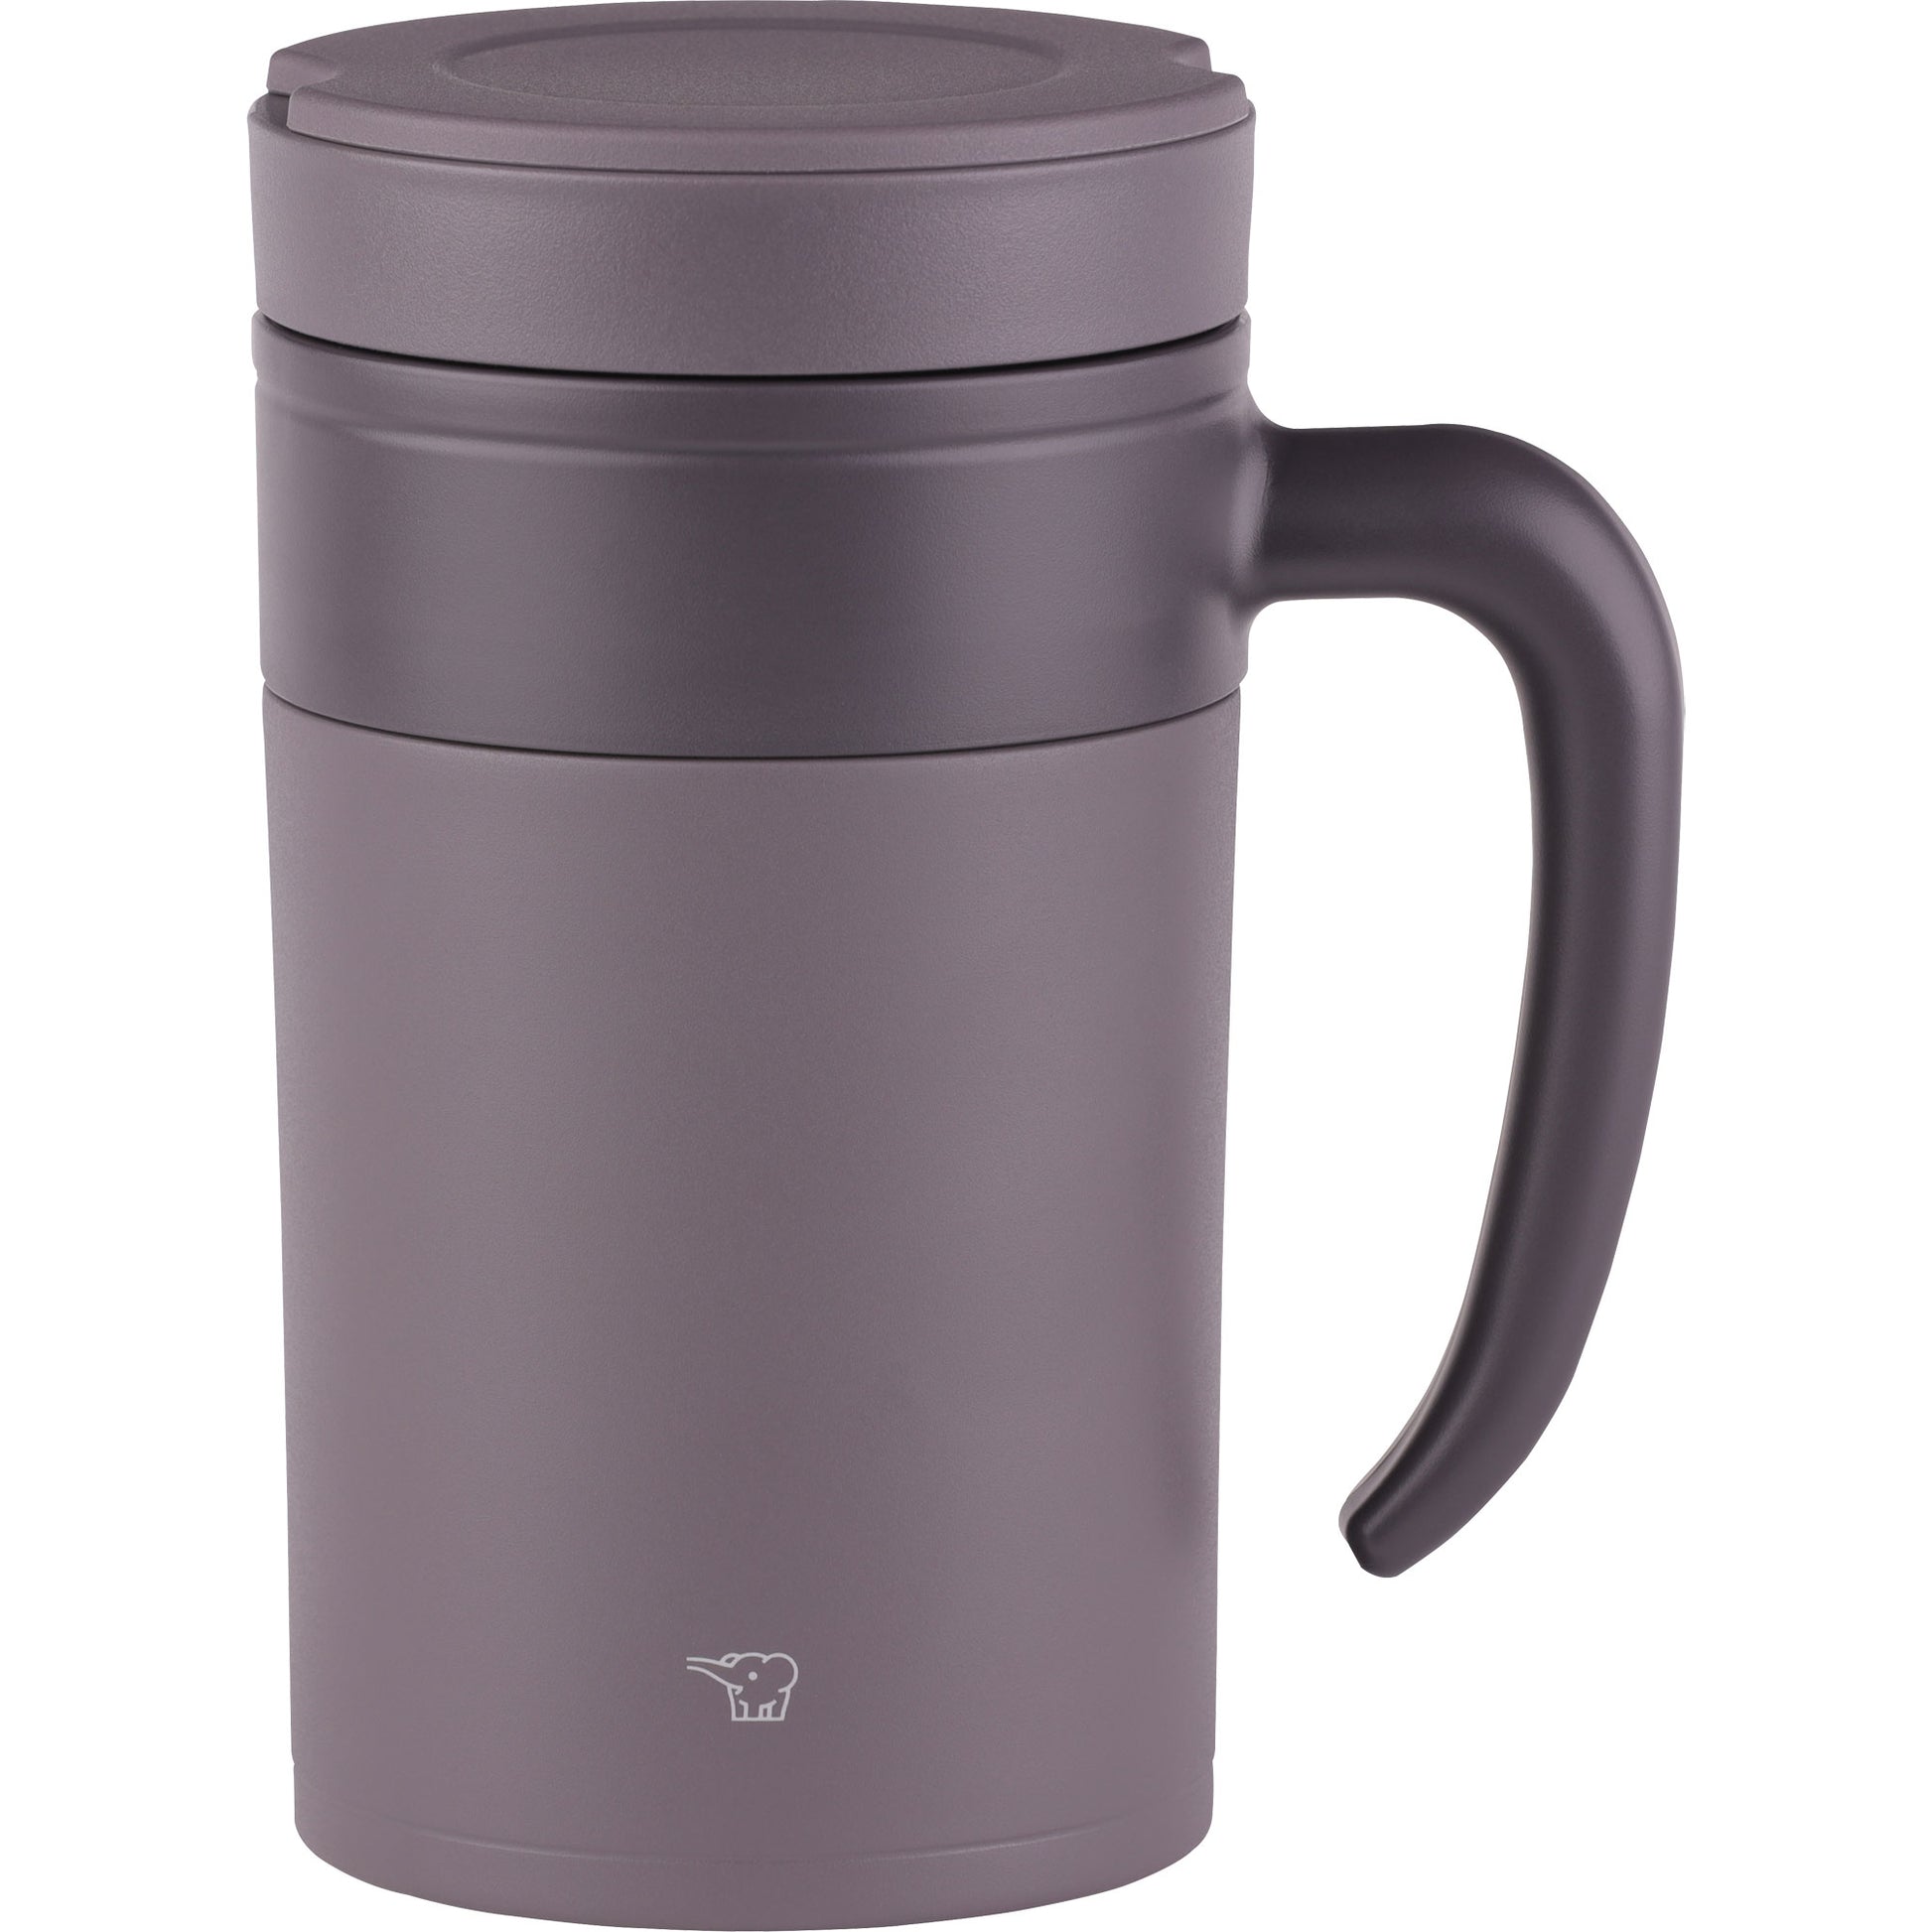 Reusable Coffee Cup with Lid and Handle - Stainless Steel